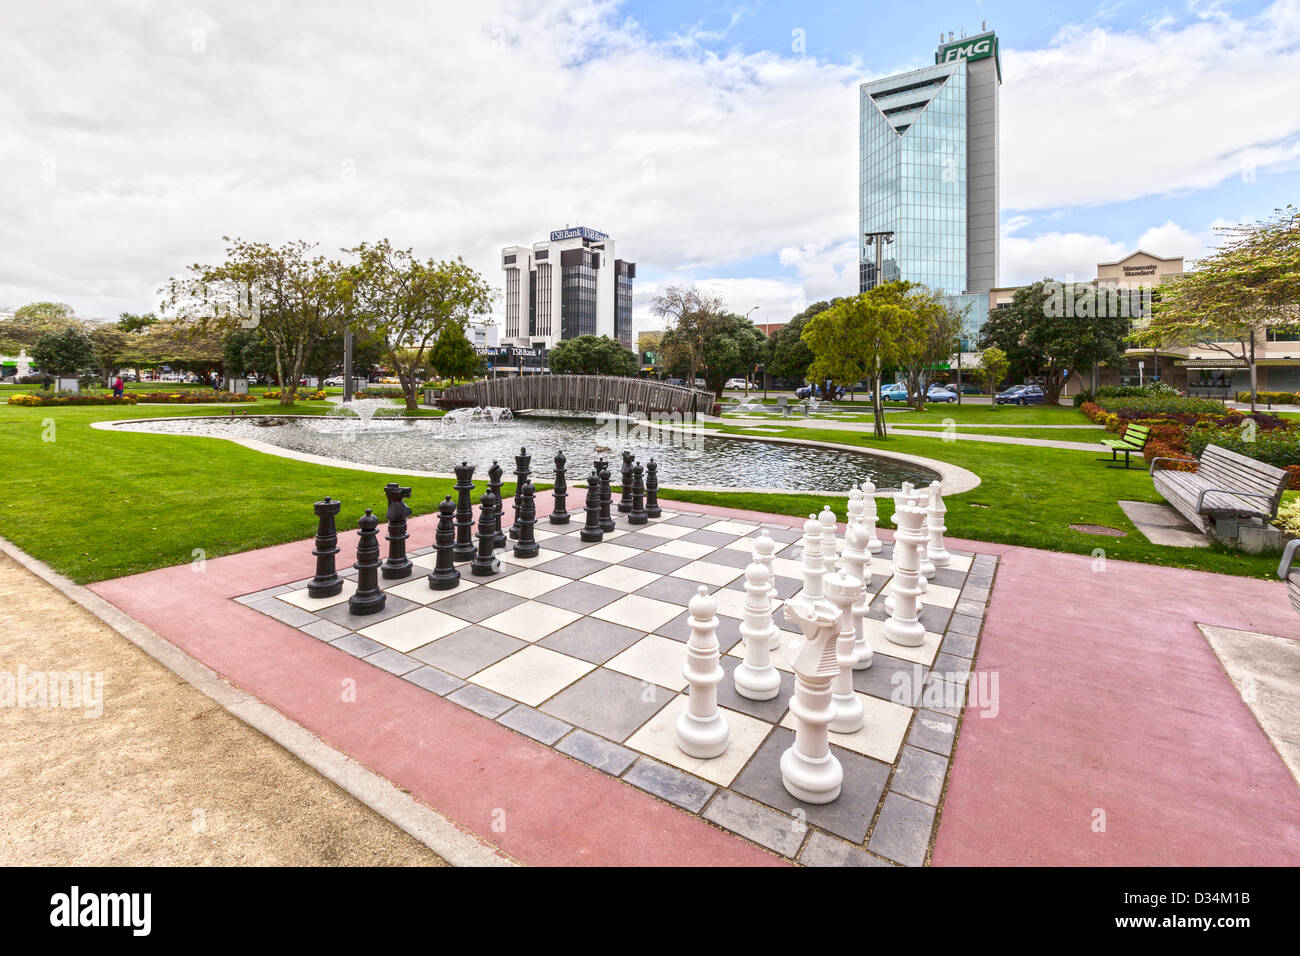 Outdoor chess board in The Square, Palmerston North City Centre, New Zealand Stock Photo